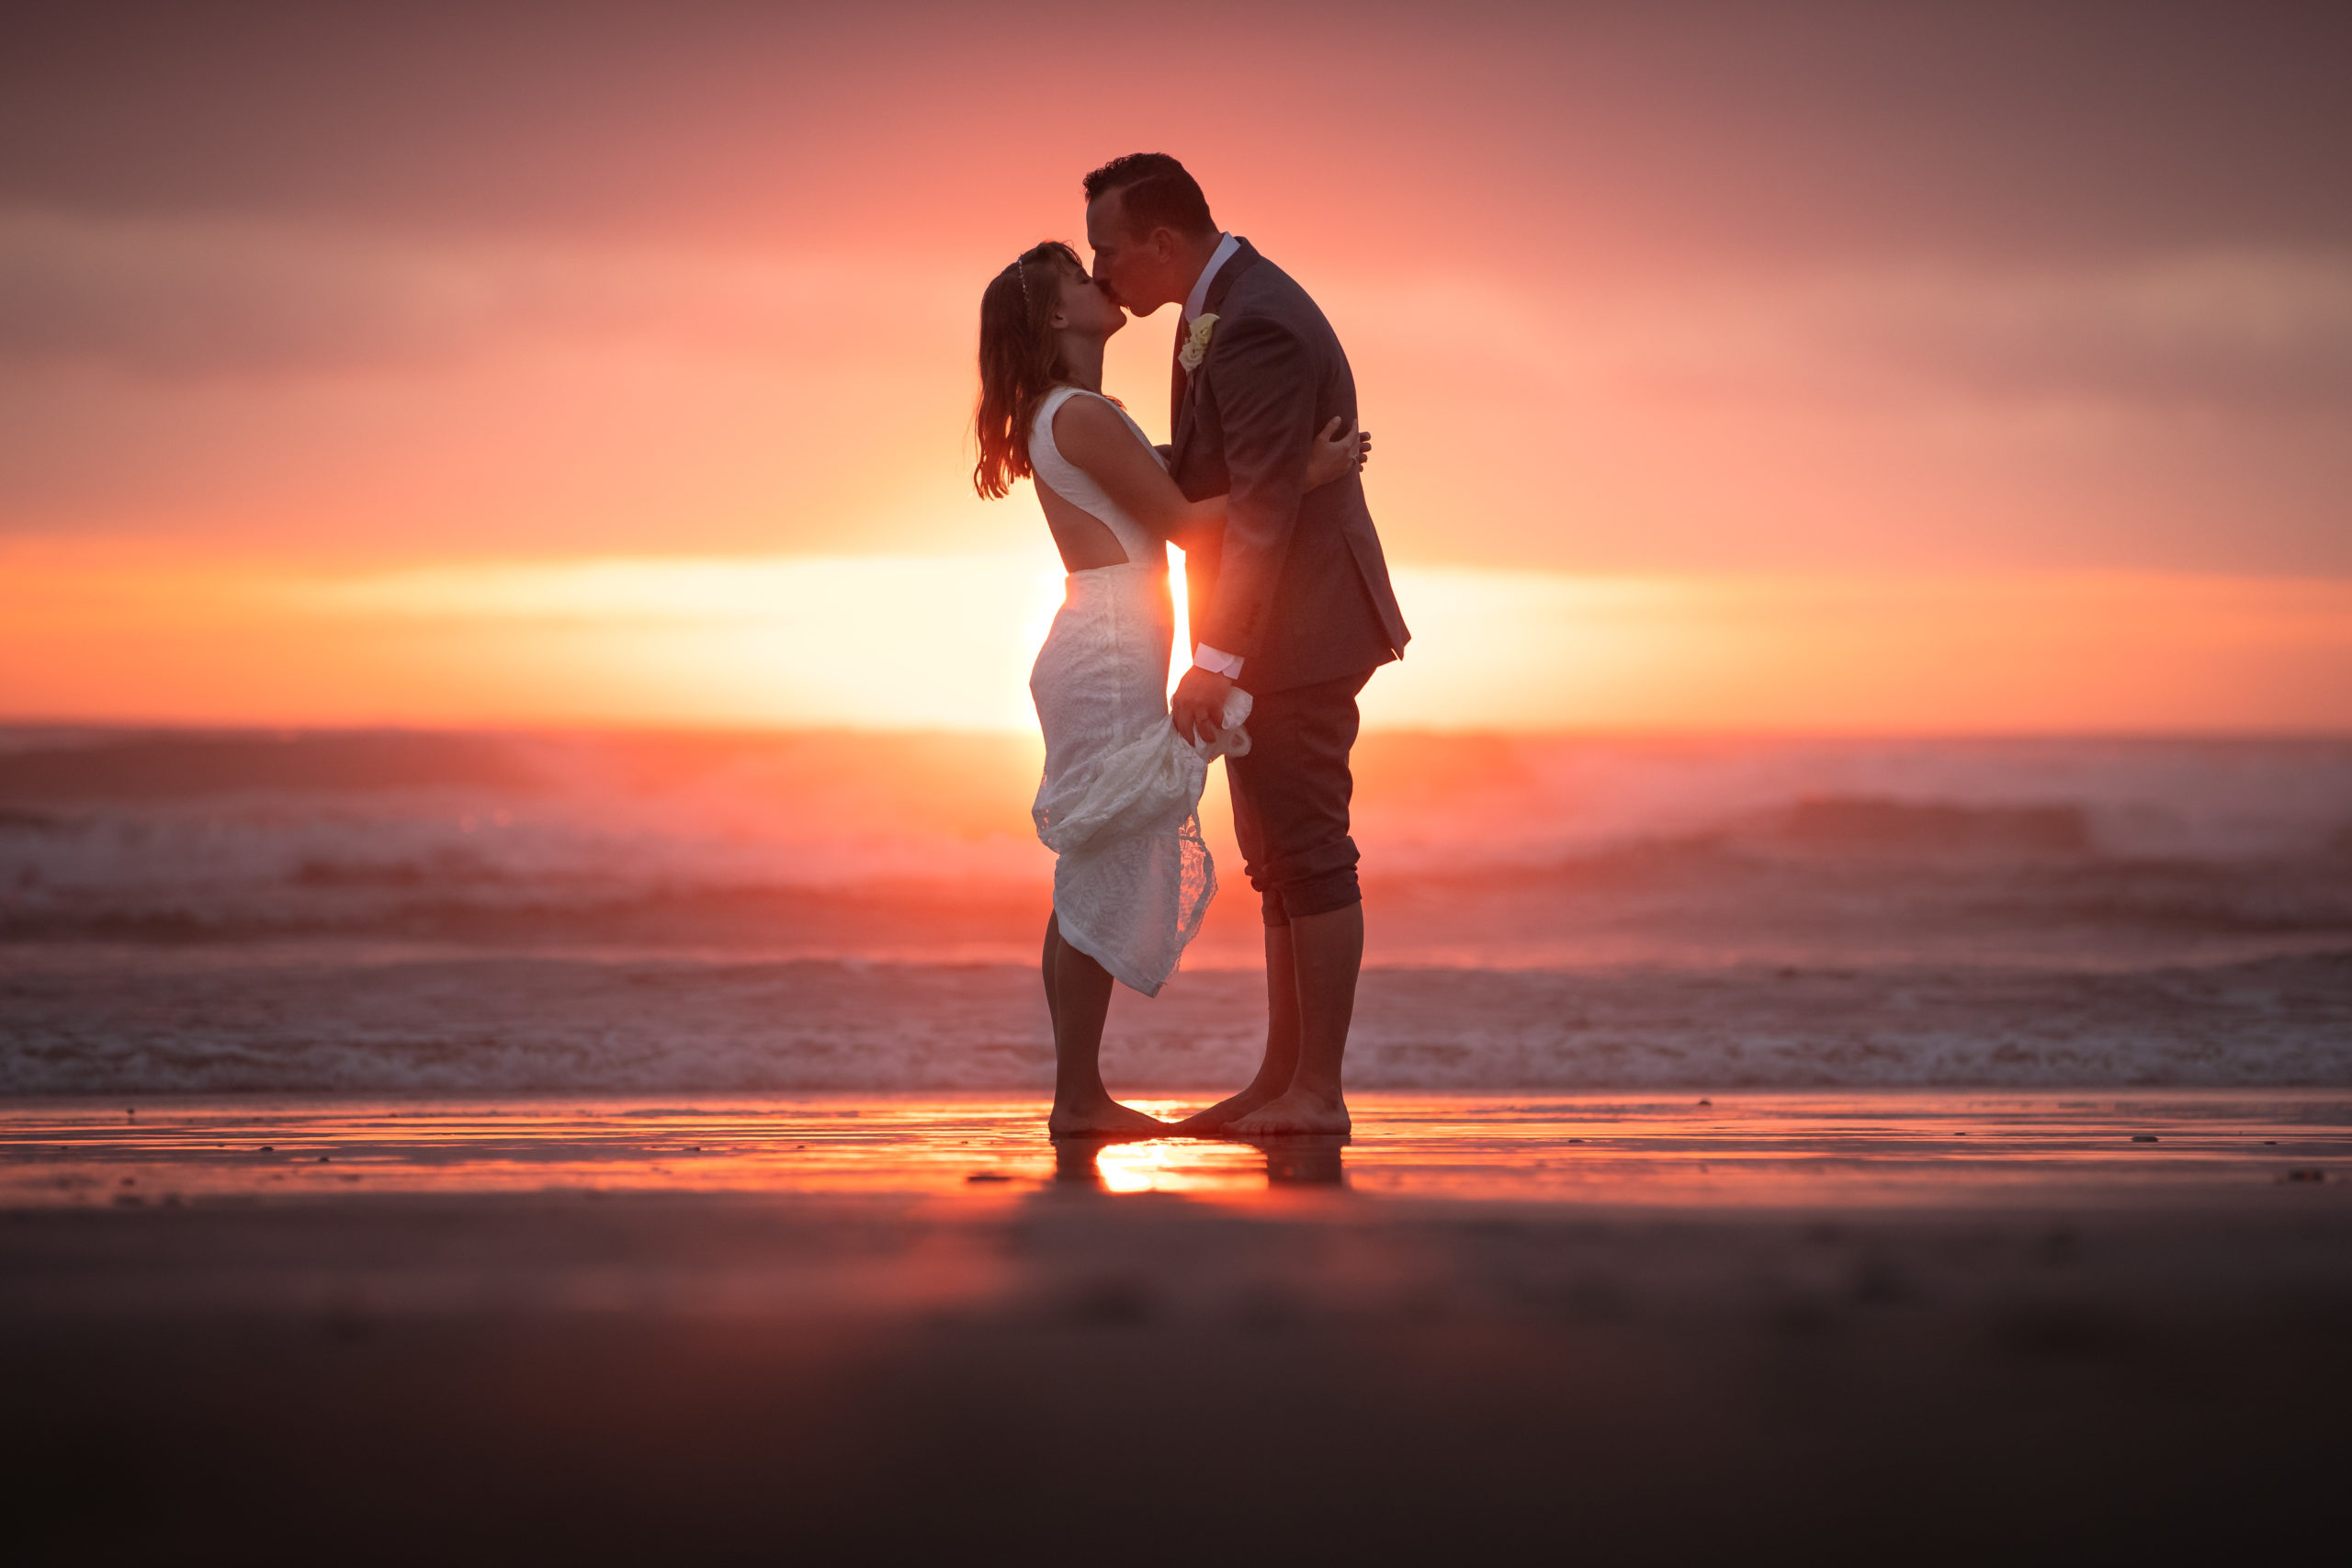 Wedding photography of a couple on the Oregon Coast during a beautiful sunset.